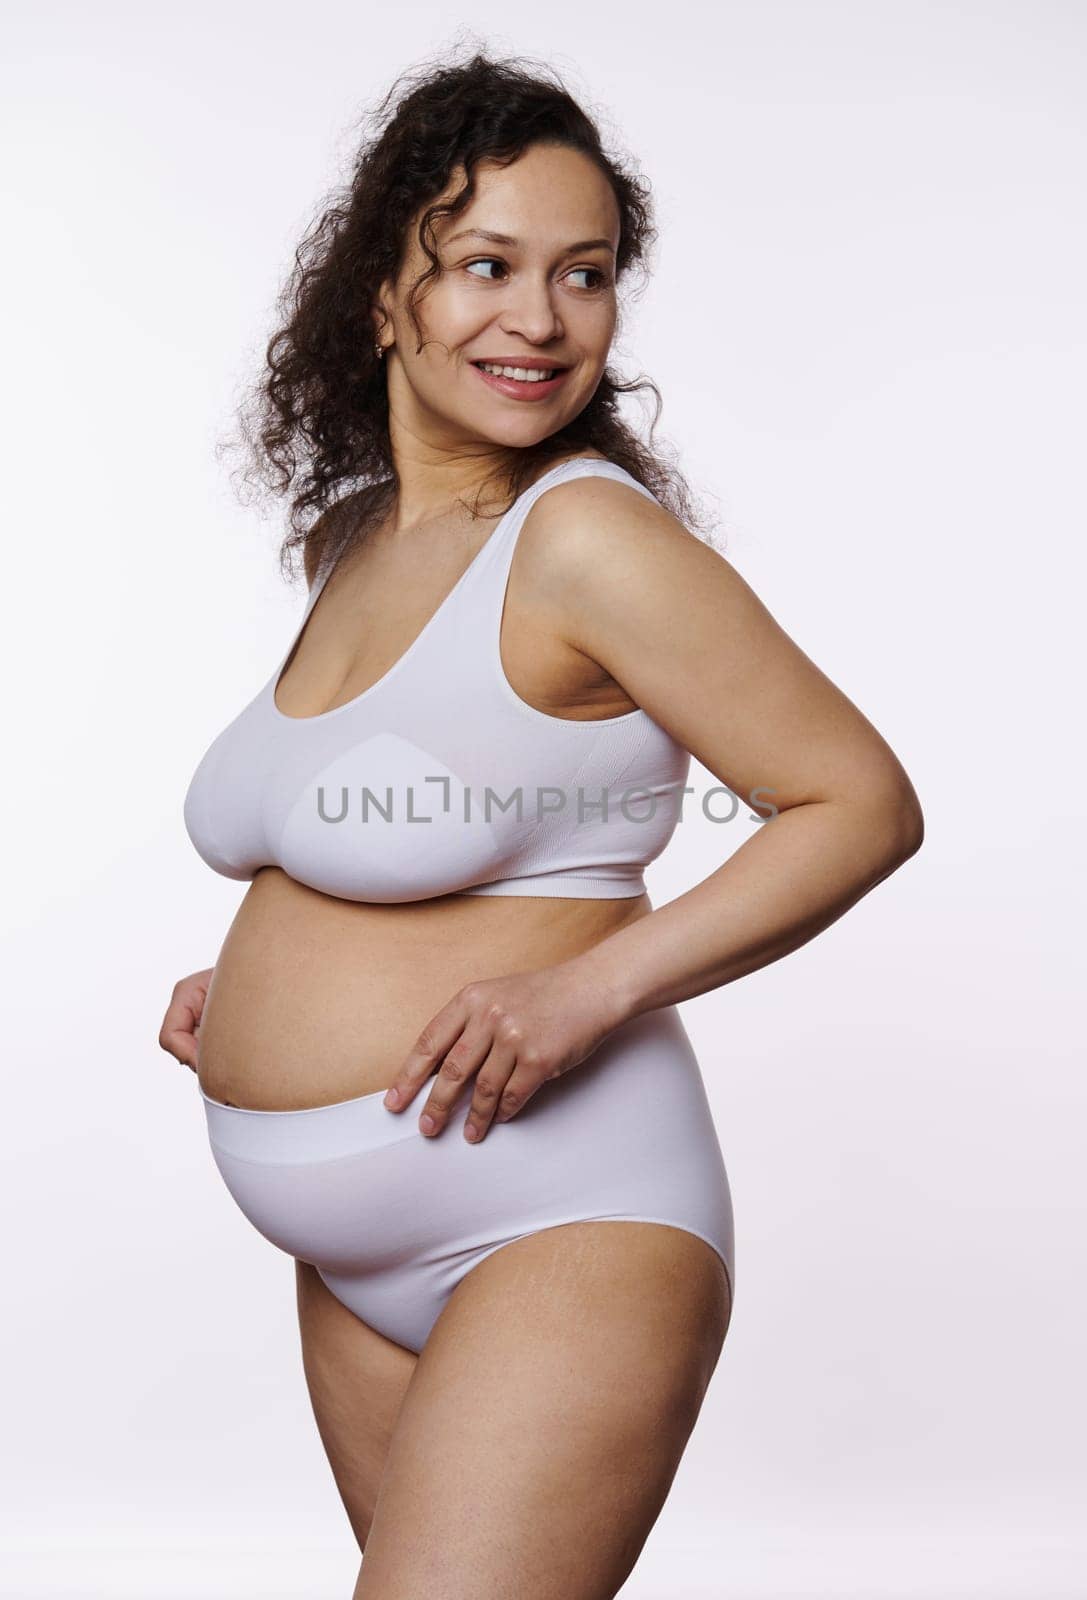 Charming pregnant woman posing bare belly in lingerie white background by artgf